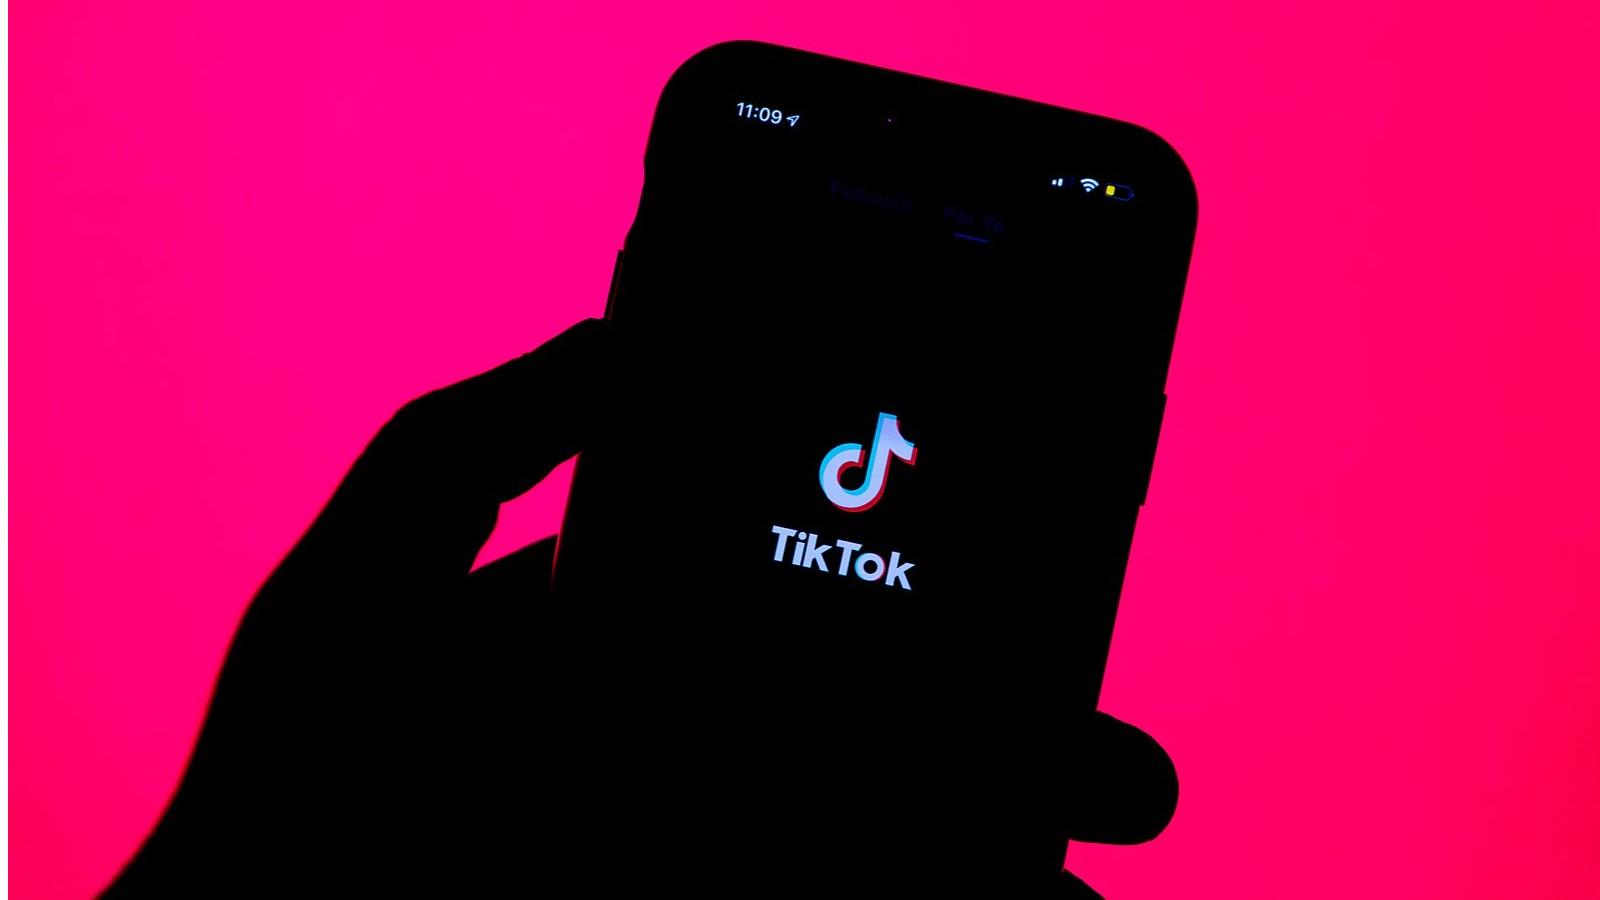 An image of the TikTok app loading page on a phone with a bright background